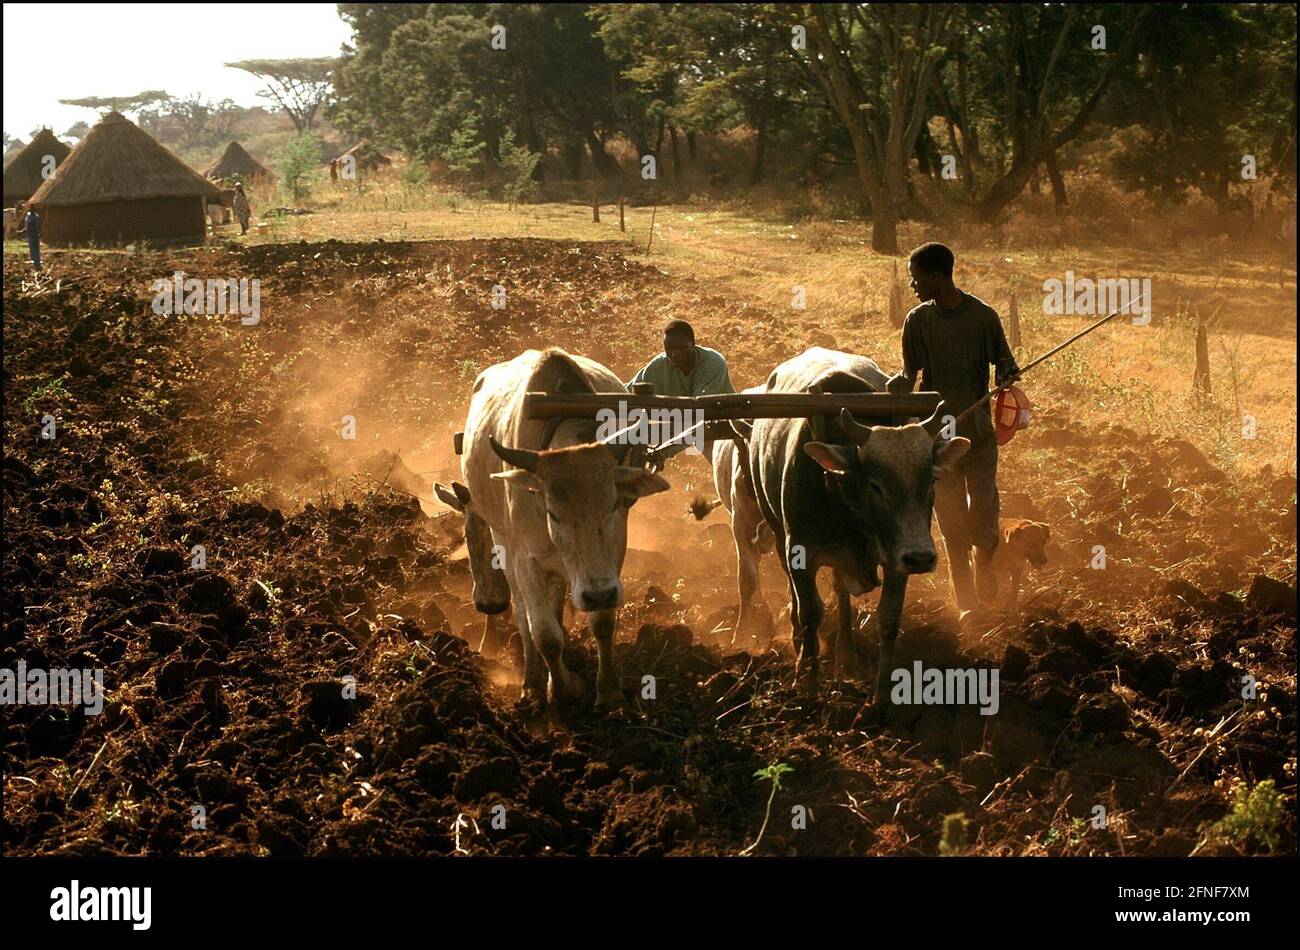 With the help of oxen, farmers paste their fields near the town of Kitale, at the foot of Mount Eglon. In the background, their village with traditional round huts. [automated translation] Stock Photo